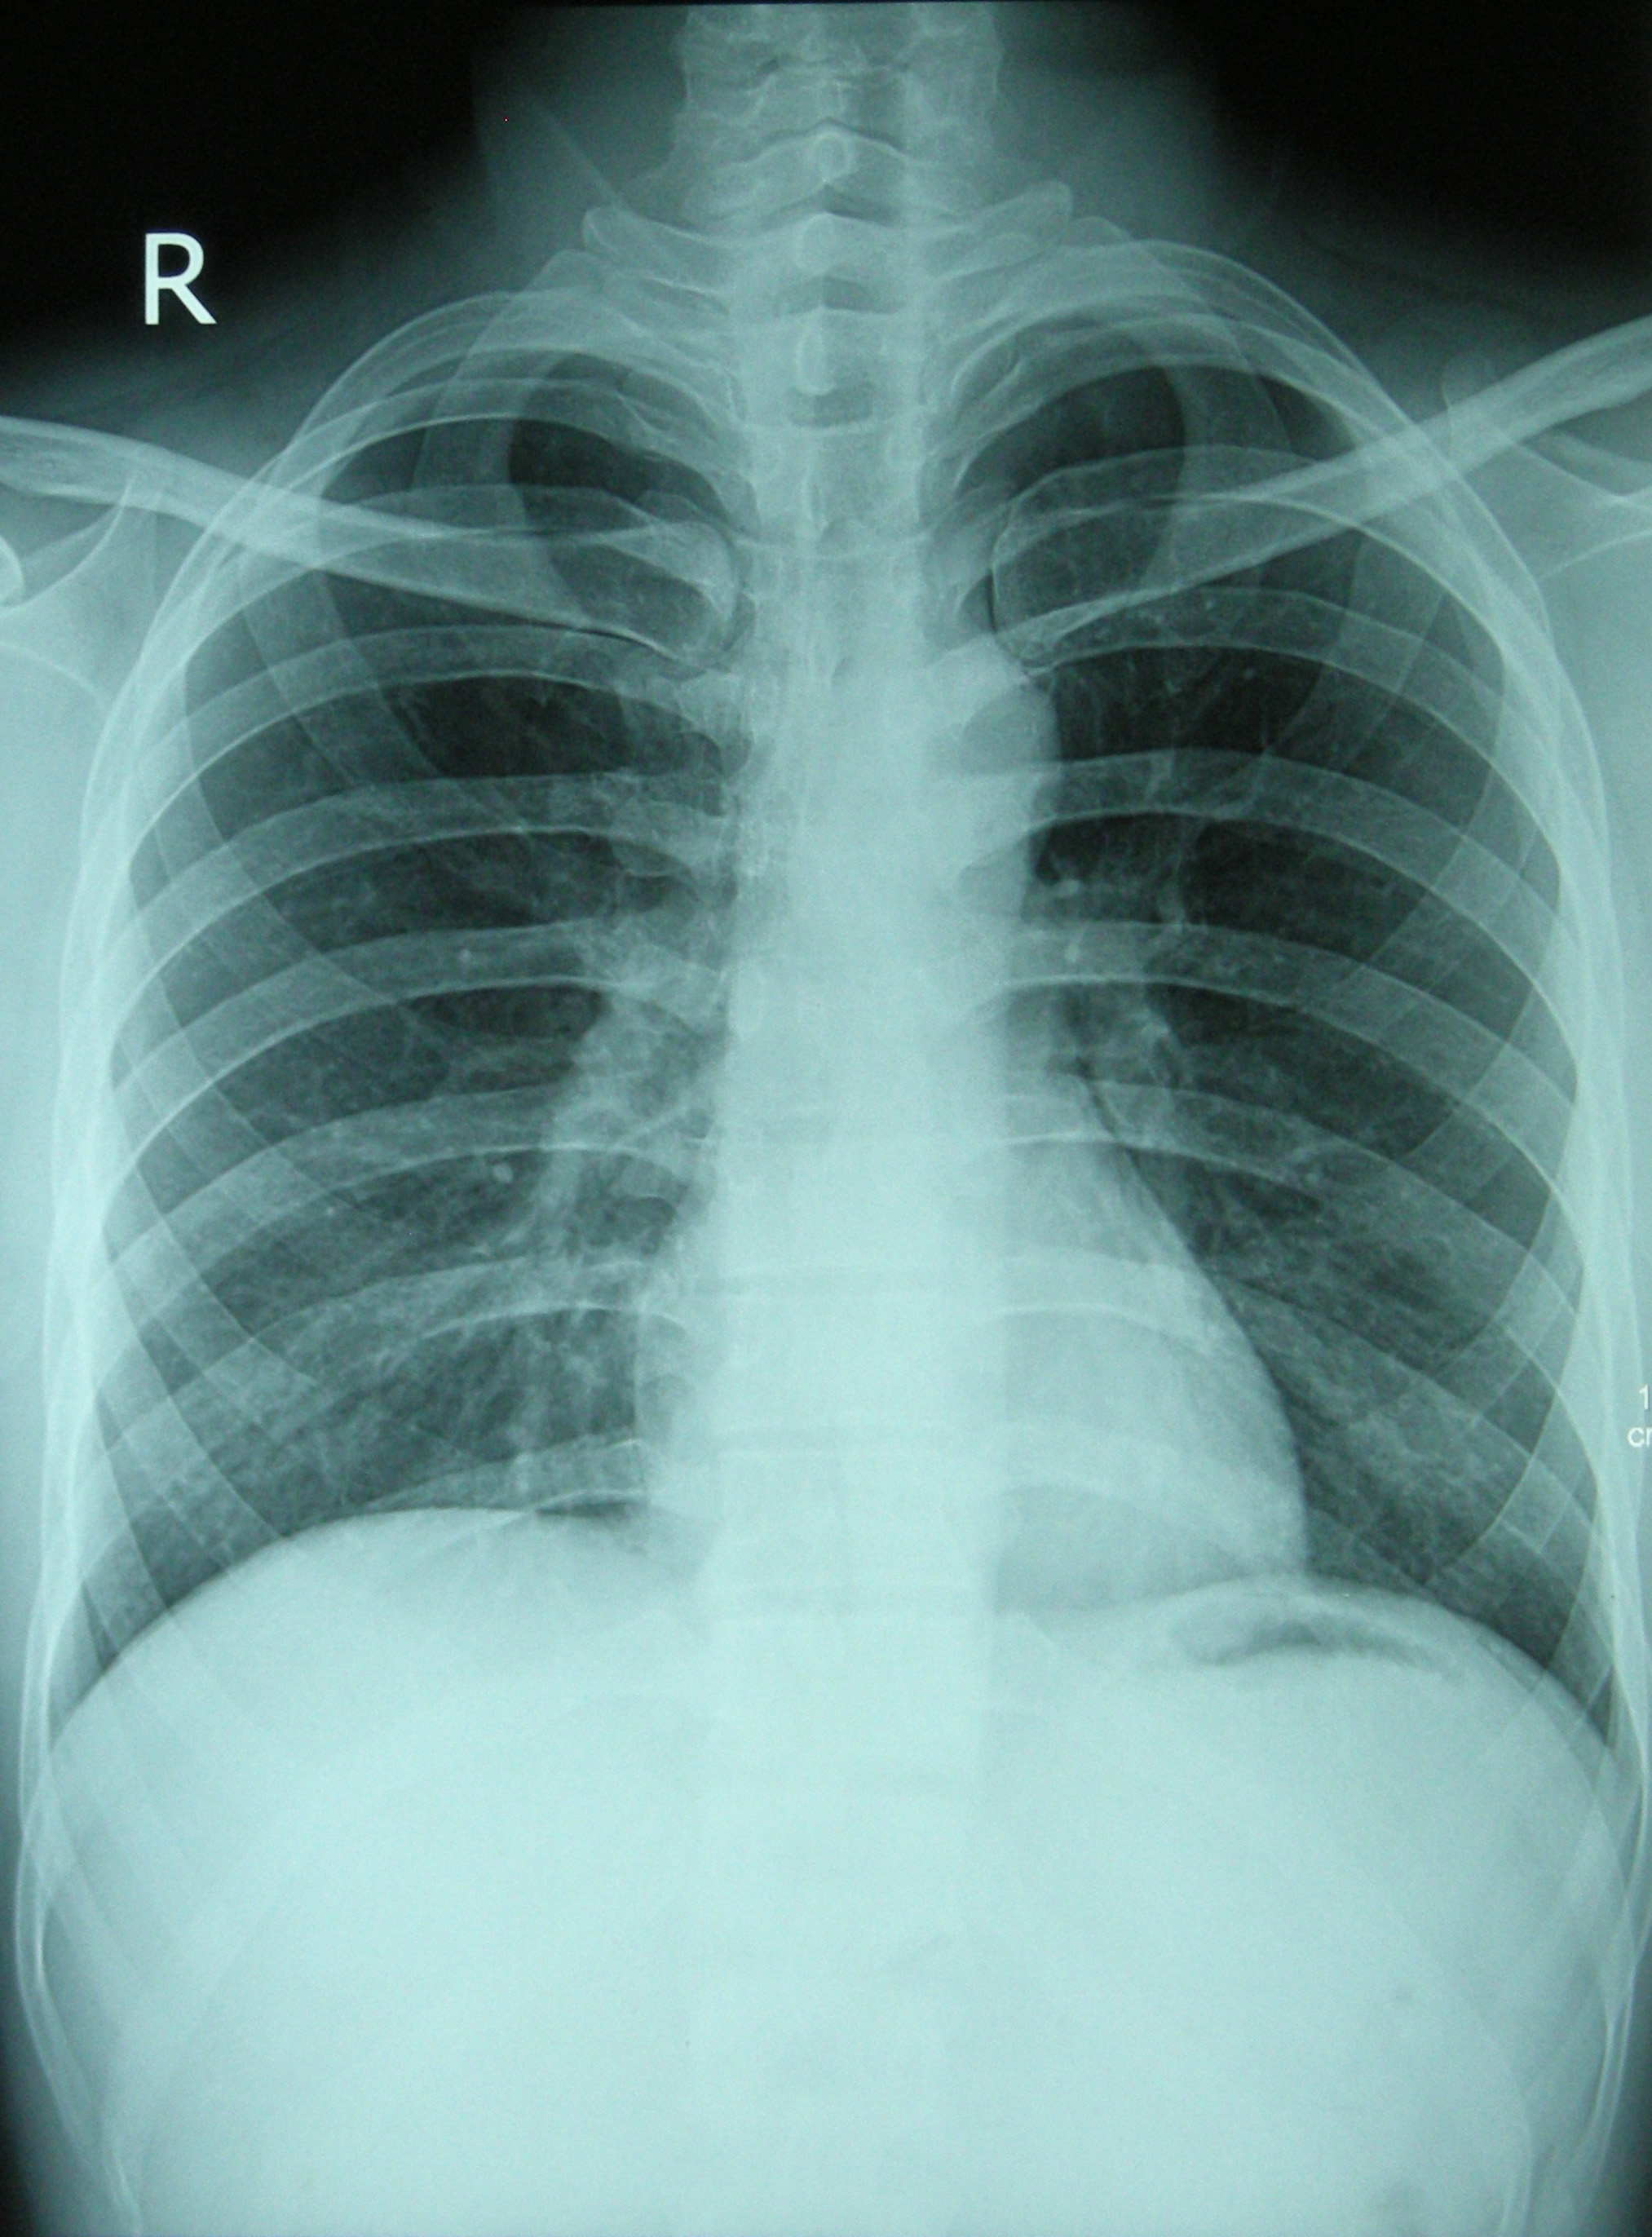 File:Chest X-ray 2346.jpg - Wikimedia Commons